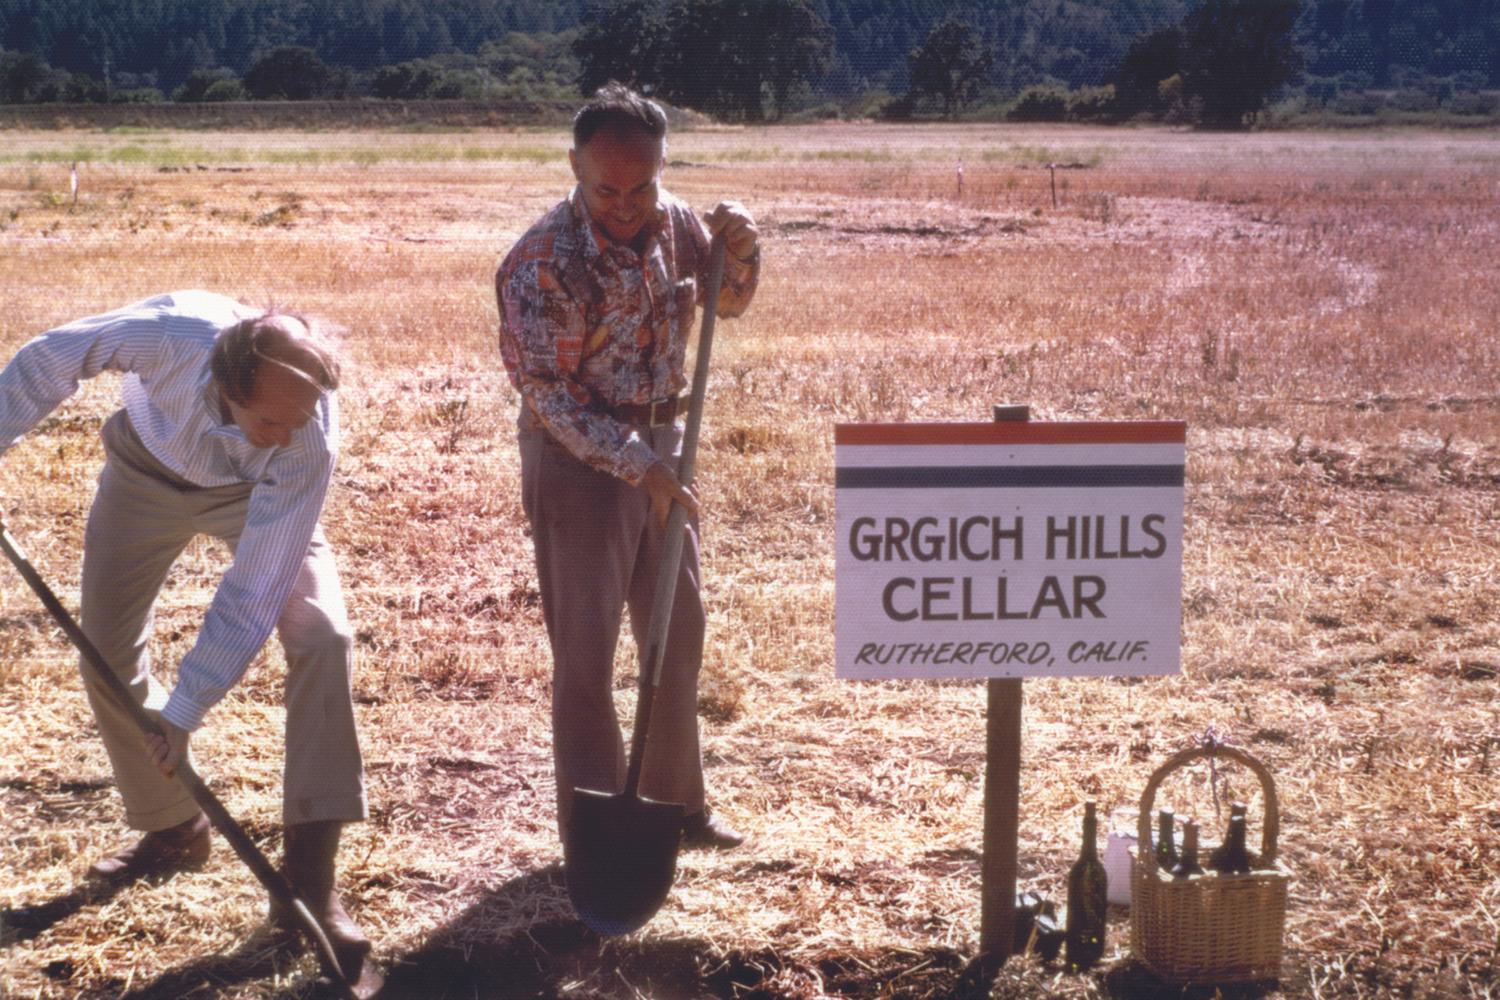 Grgich and partner Austin Hills break ground on the Grgich Hills winery, July 4, 1977.  Grgich called it “my independence day.”